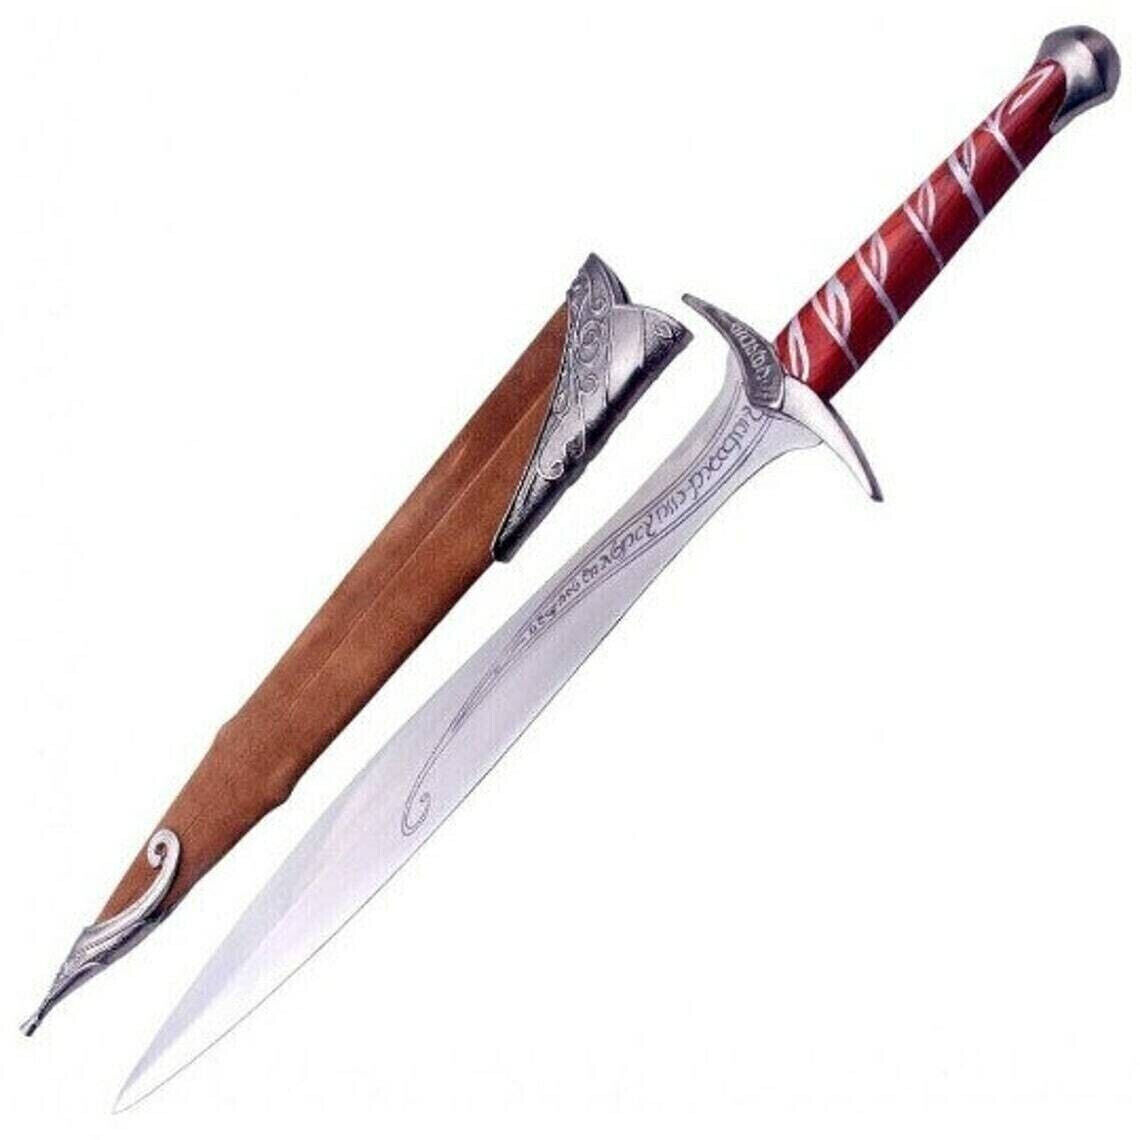 Handmade LOTR Hobbit Sting Sword Replica from Lord of the Rings With Scabbard